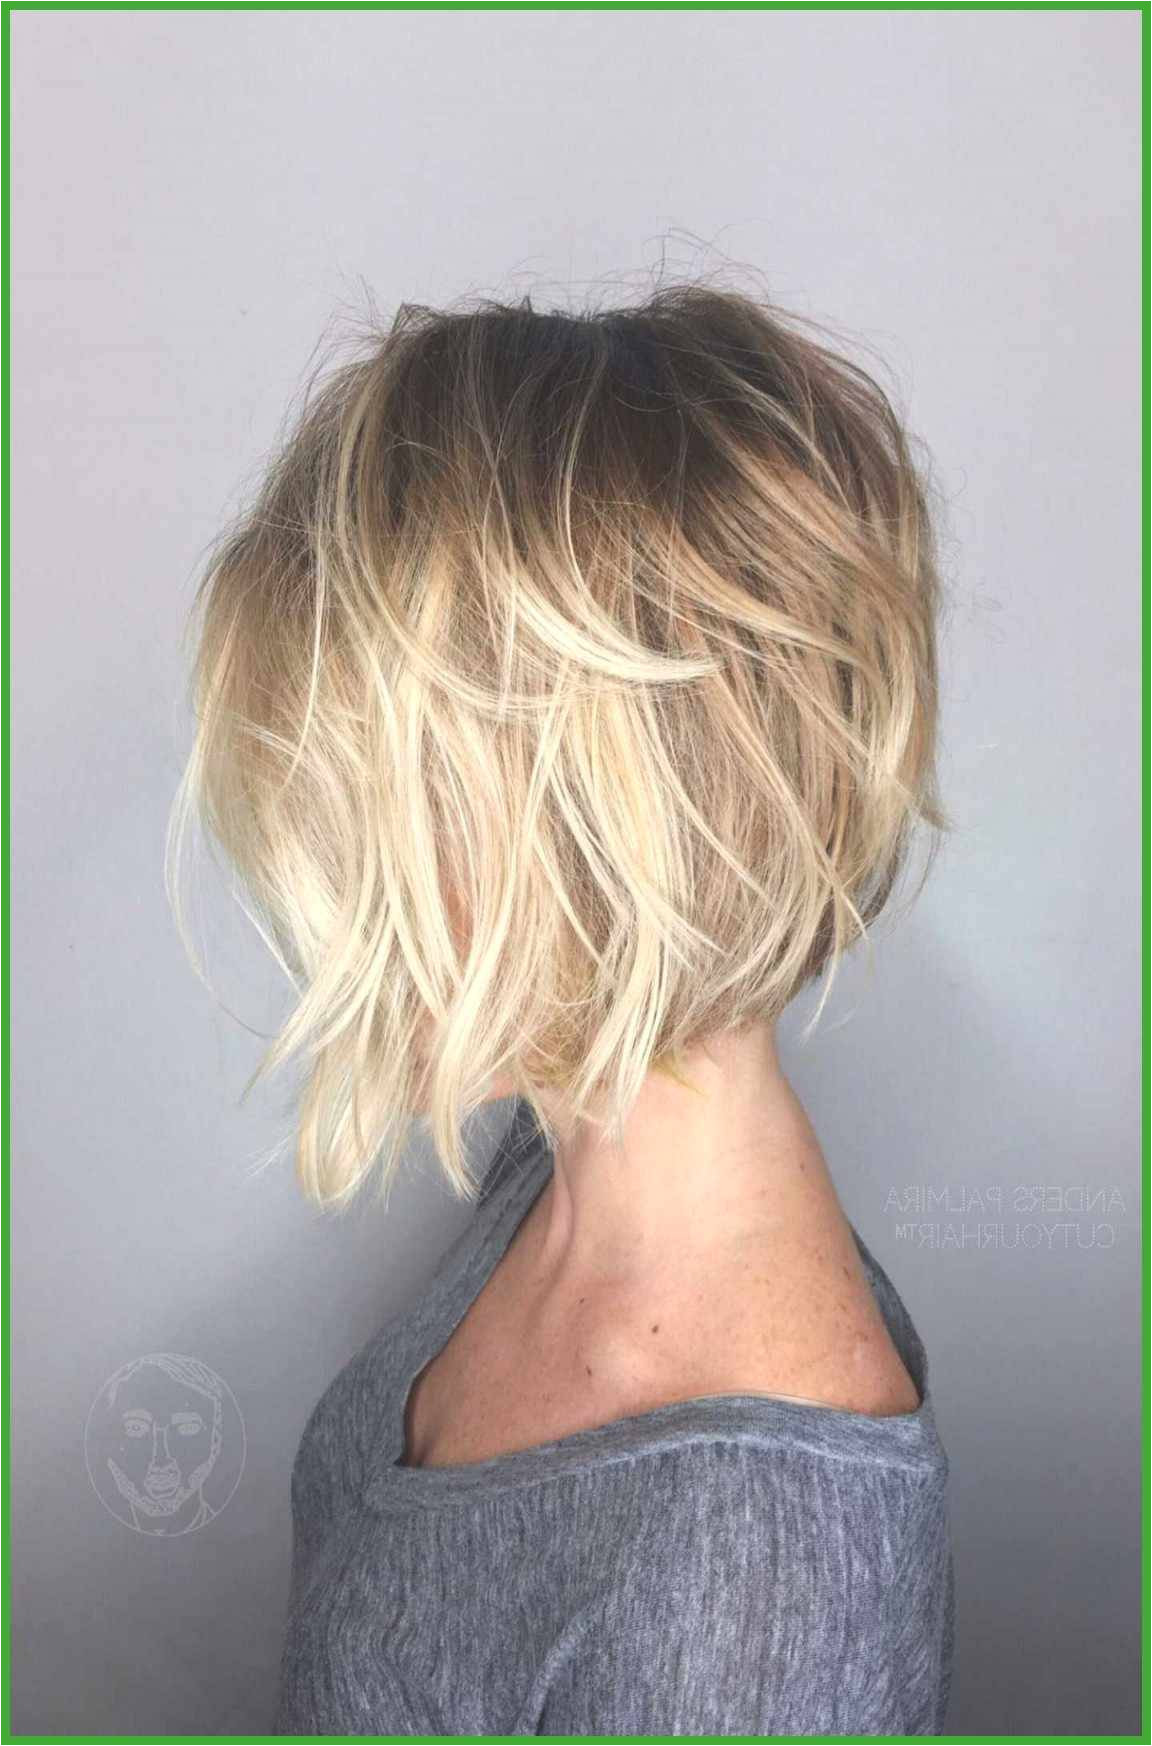 Gallery of Easy Hairstyles For Short Hair To Do At Home New Short Cuts For Curly Hair Short Haircut For Thick Hair 0d